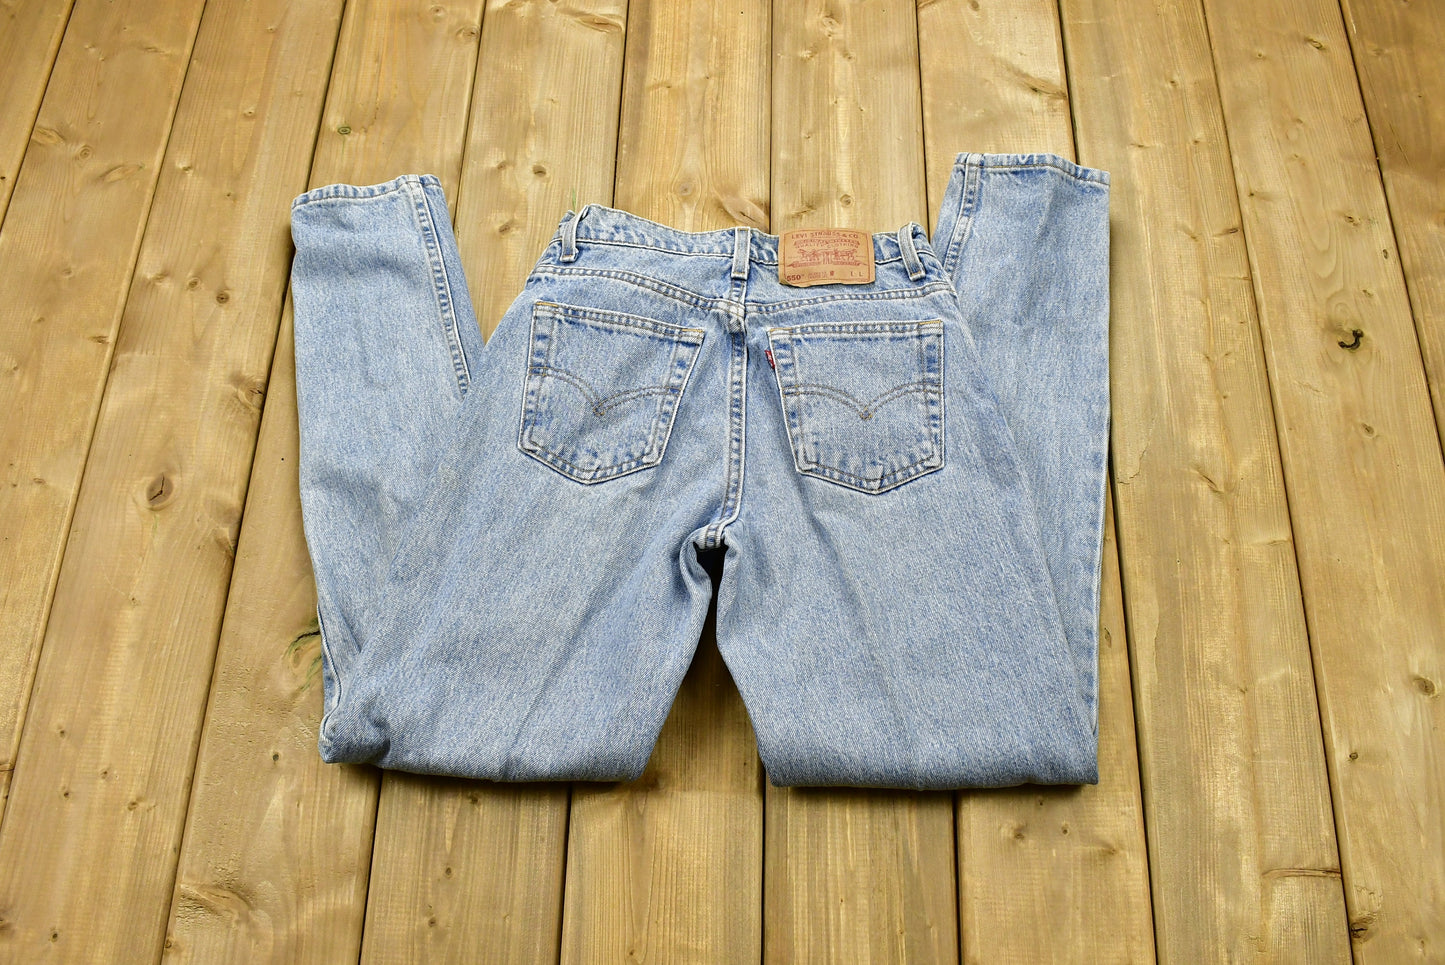 Vintage 1990s Levi's 550 Red Tab Jeans Size 7 / 90s Denim / Relaxed Fit / Vintage Denim / Tapered Leg / Made In USA / Vintage Levi's